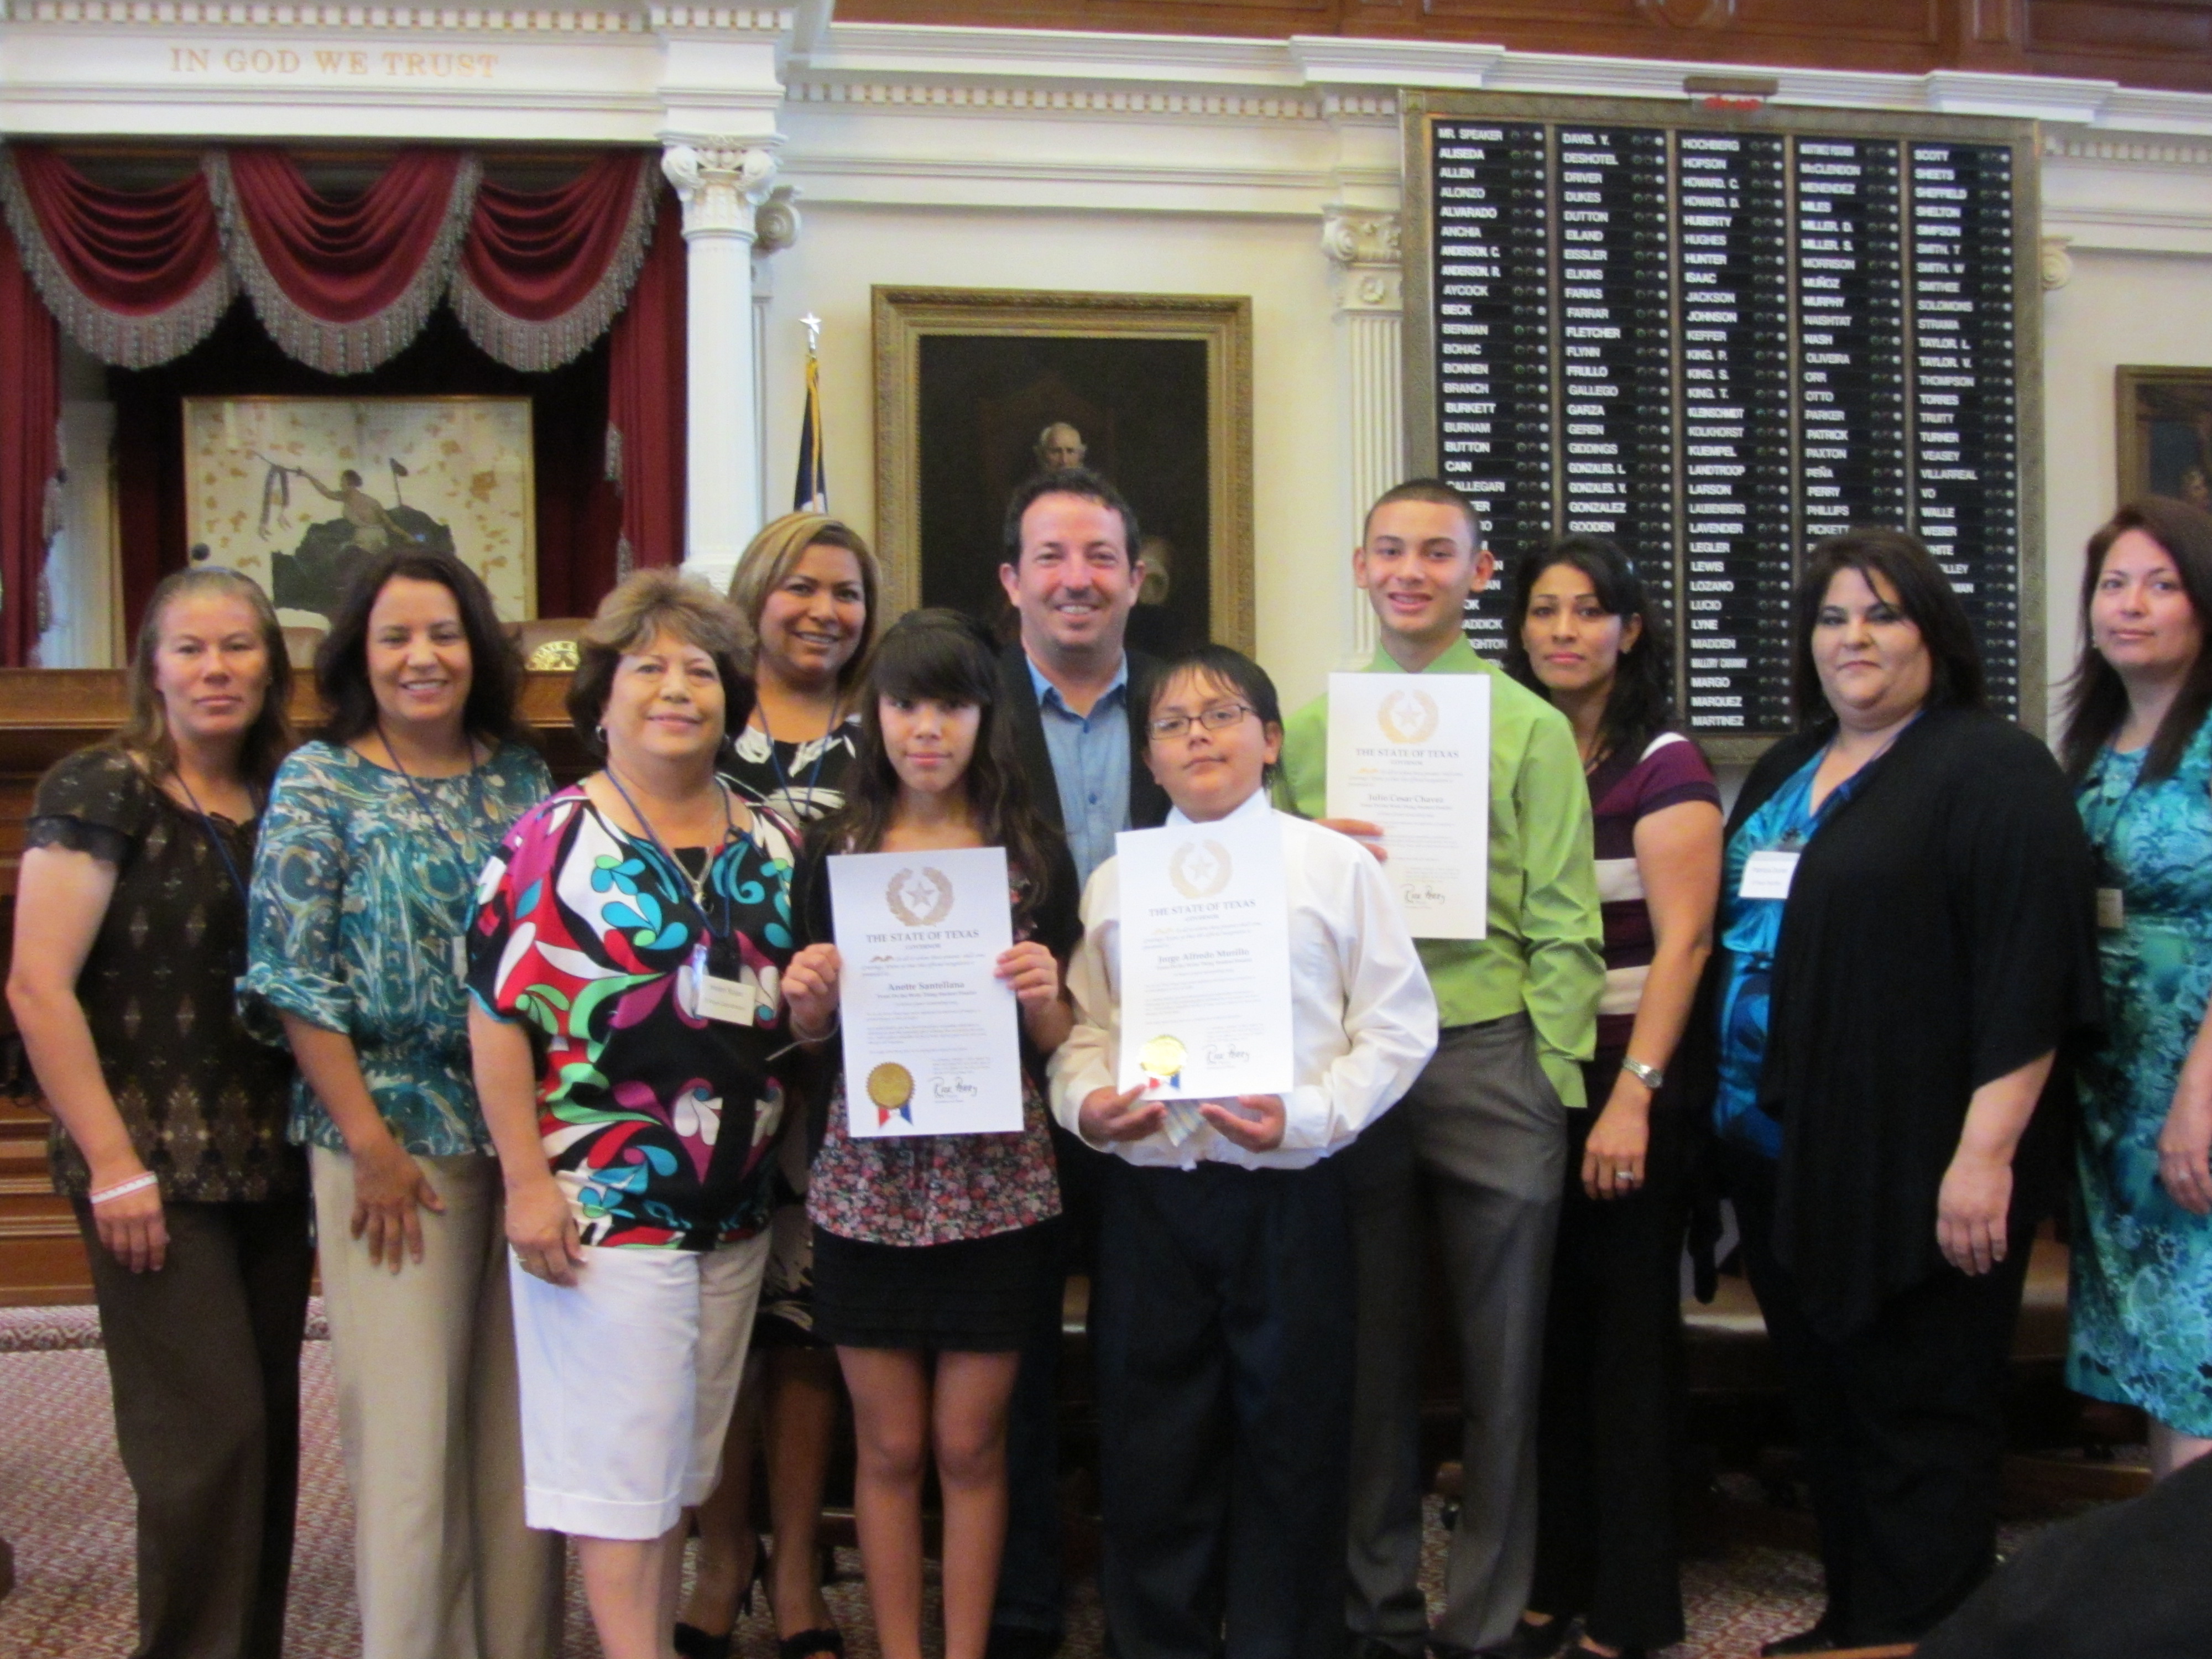 "Do the Write Thing" Receiving and award at the Texas State Capital